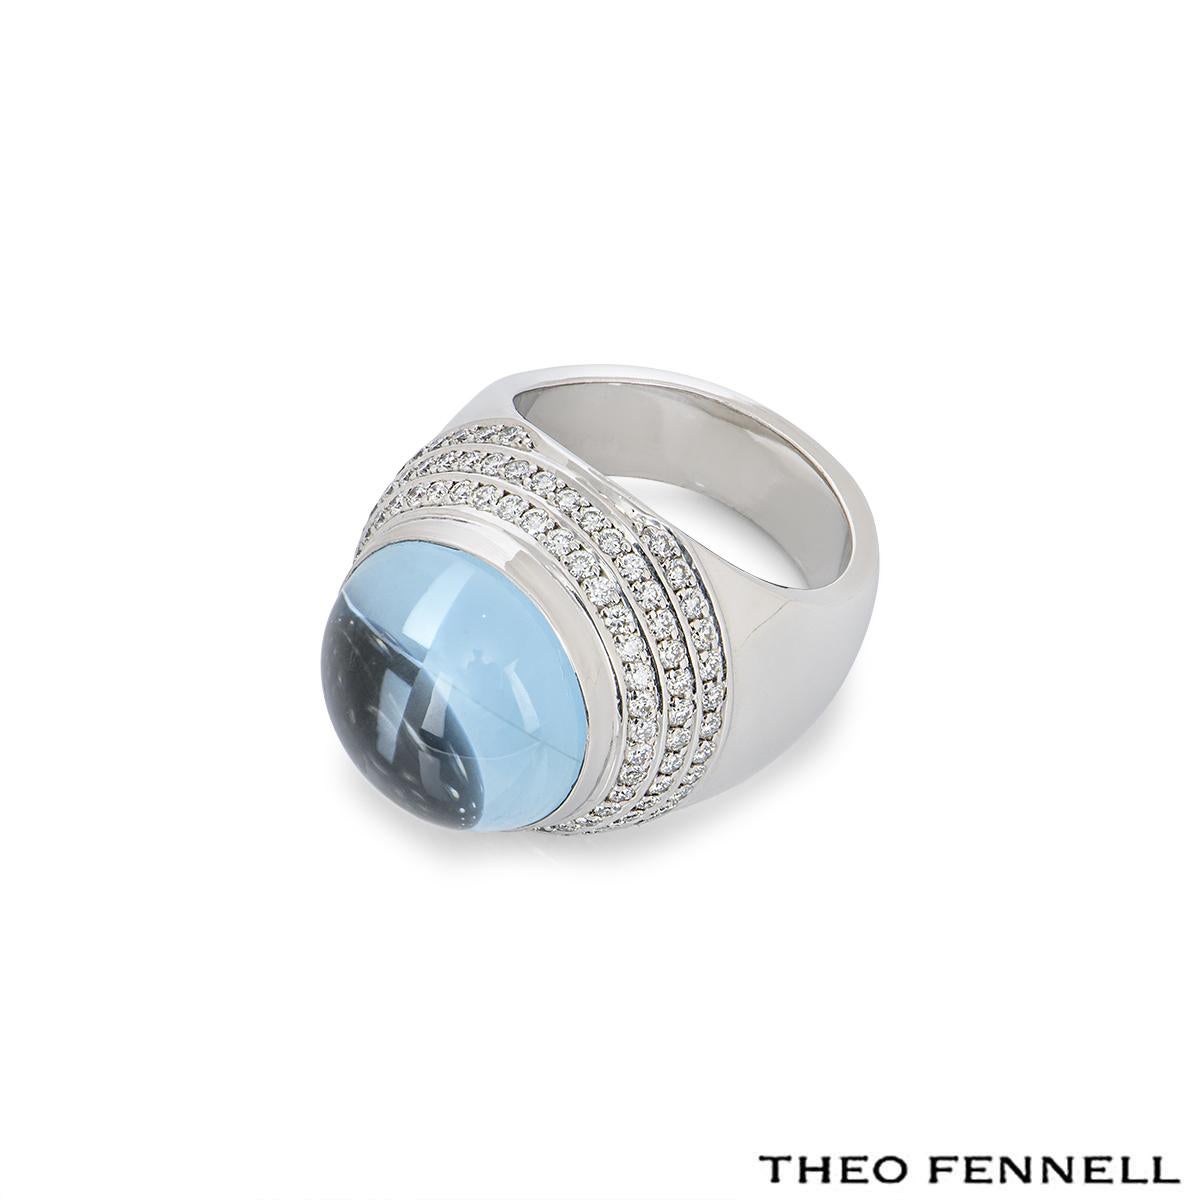 theo fennell rings